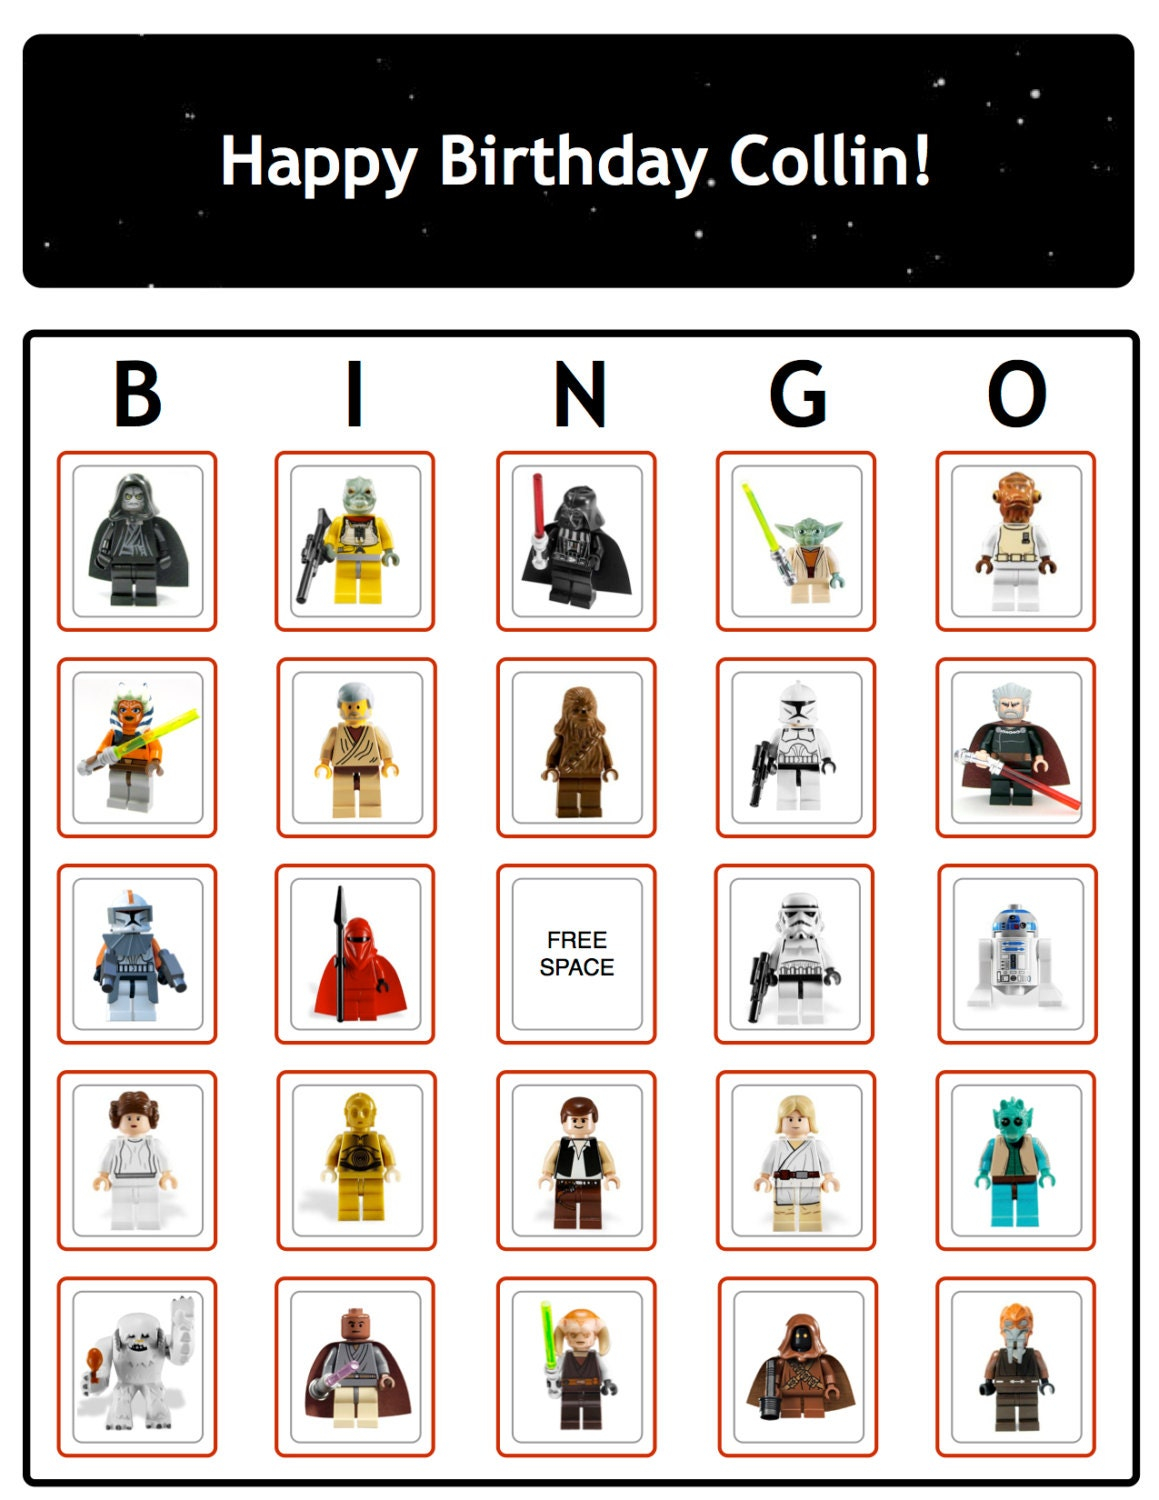 Bingo Star Wars Birthday Party Game Cards Now With THE